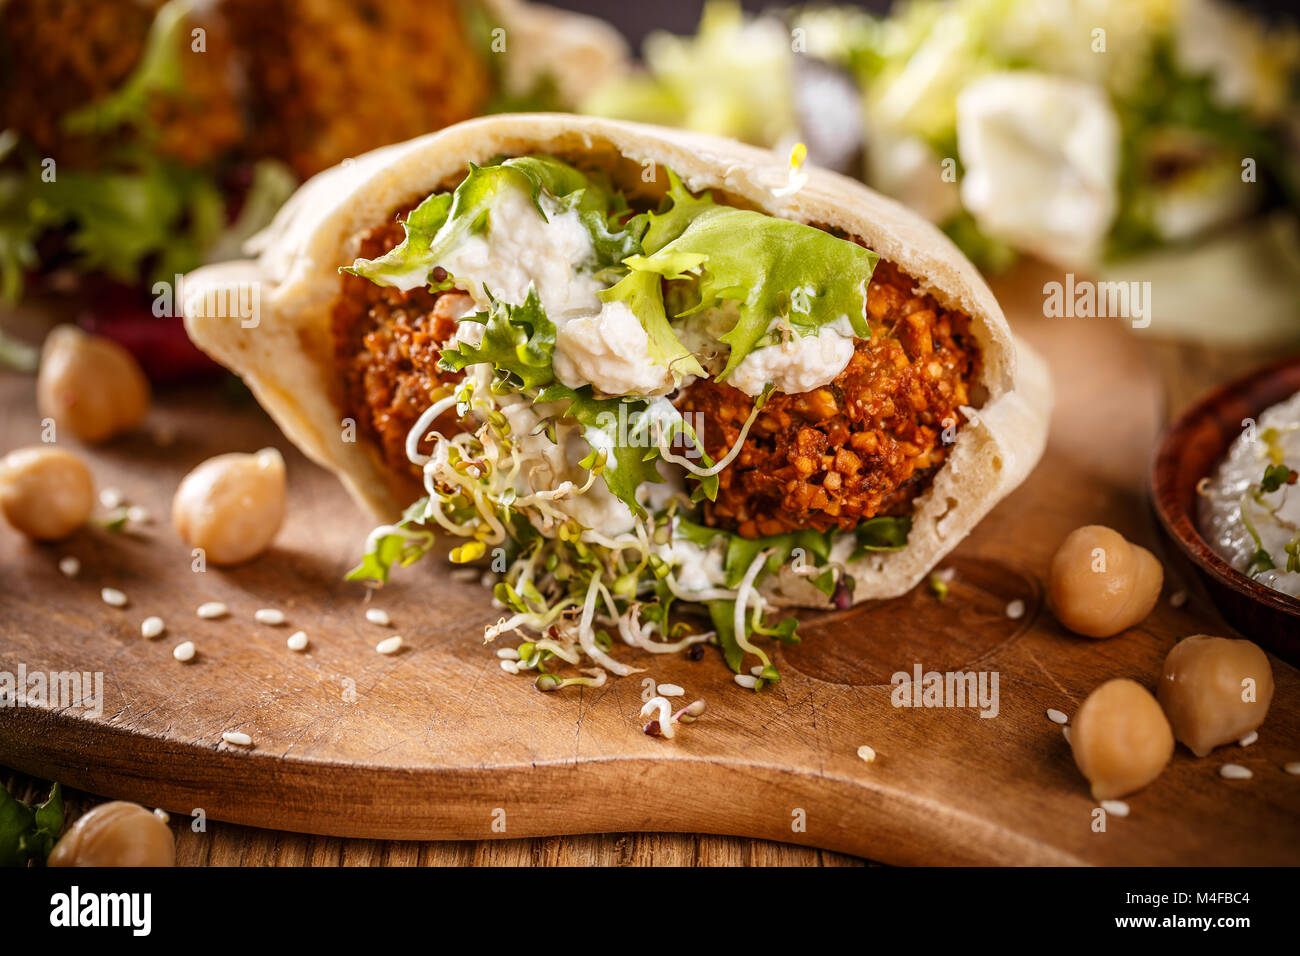 Delicious falafel snack ready to eat on wooden cutting board Stock Photo